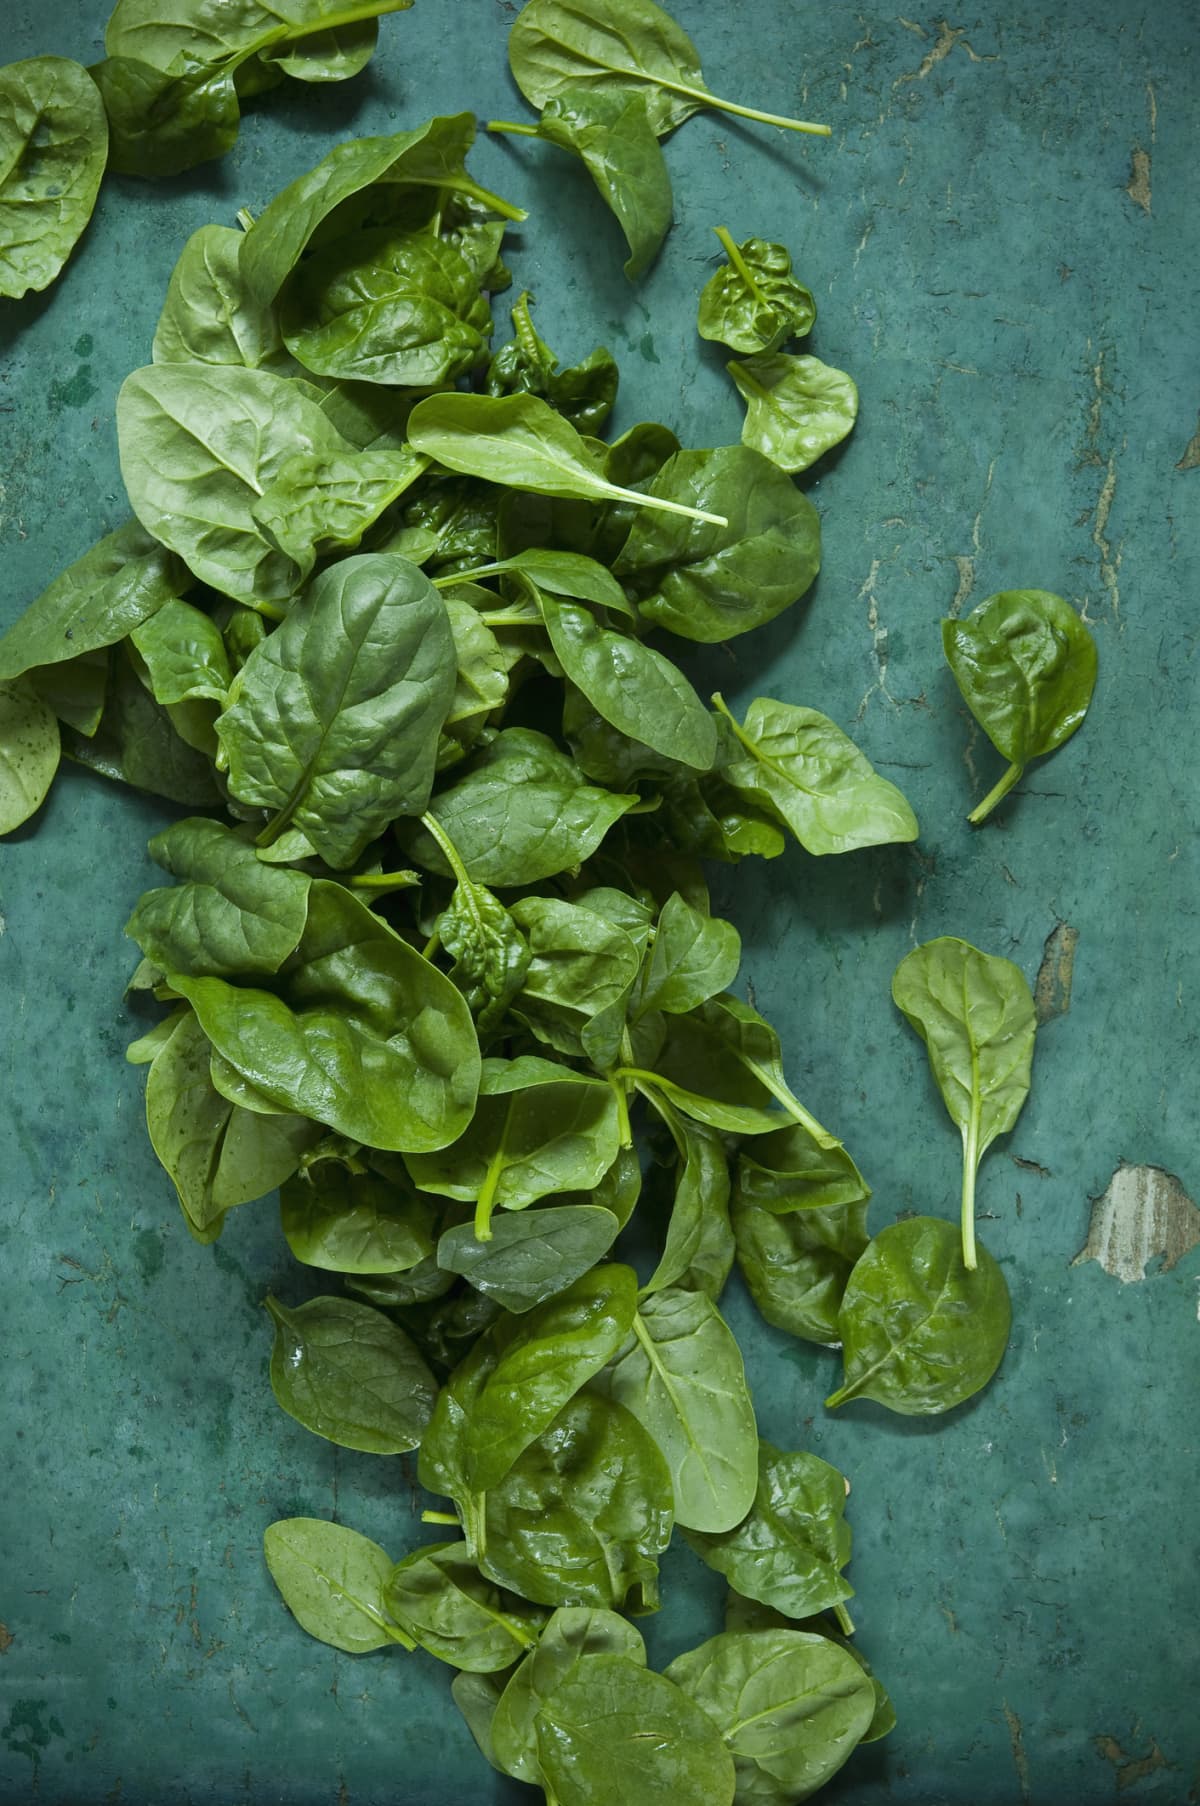 Fresh spinach leaves scattered across a teal surface